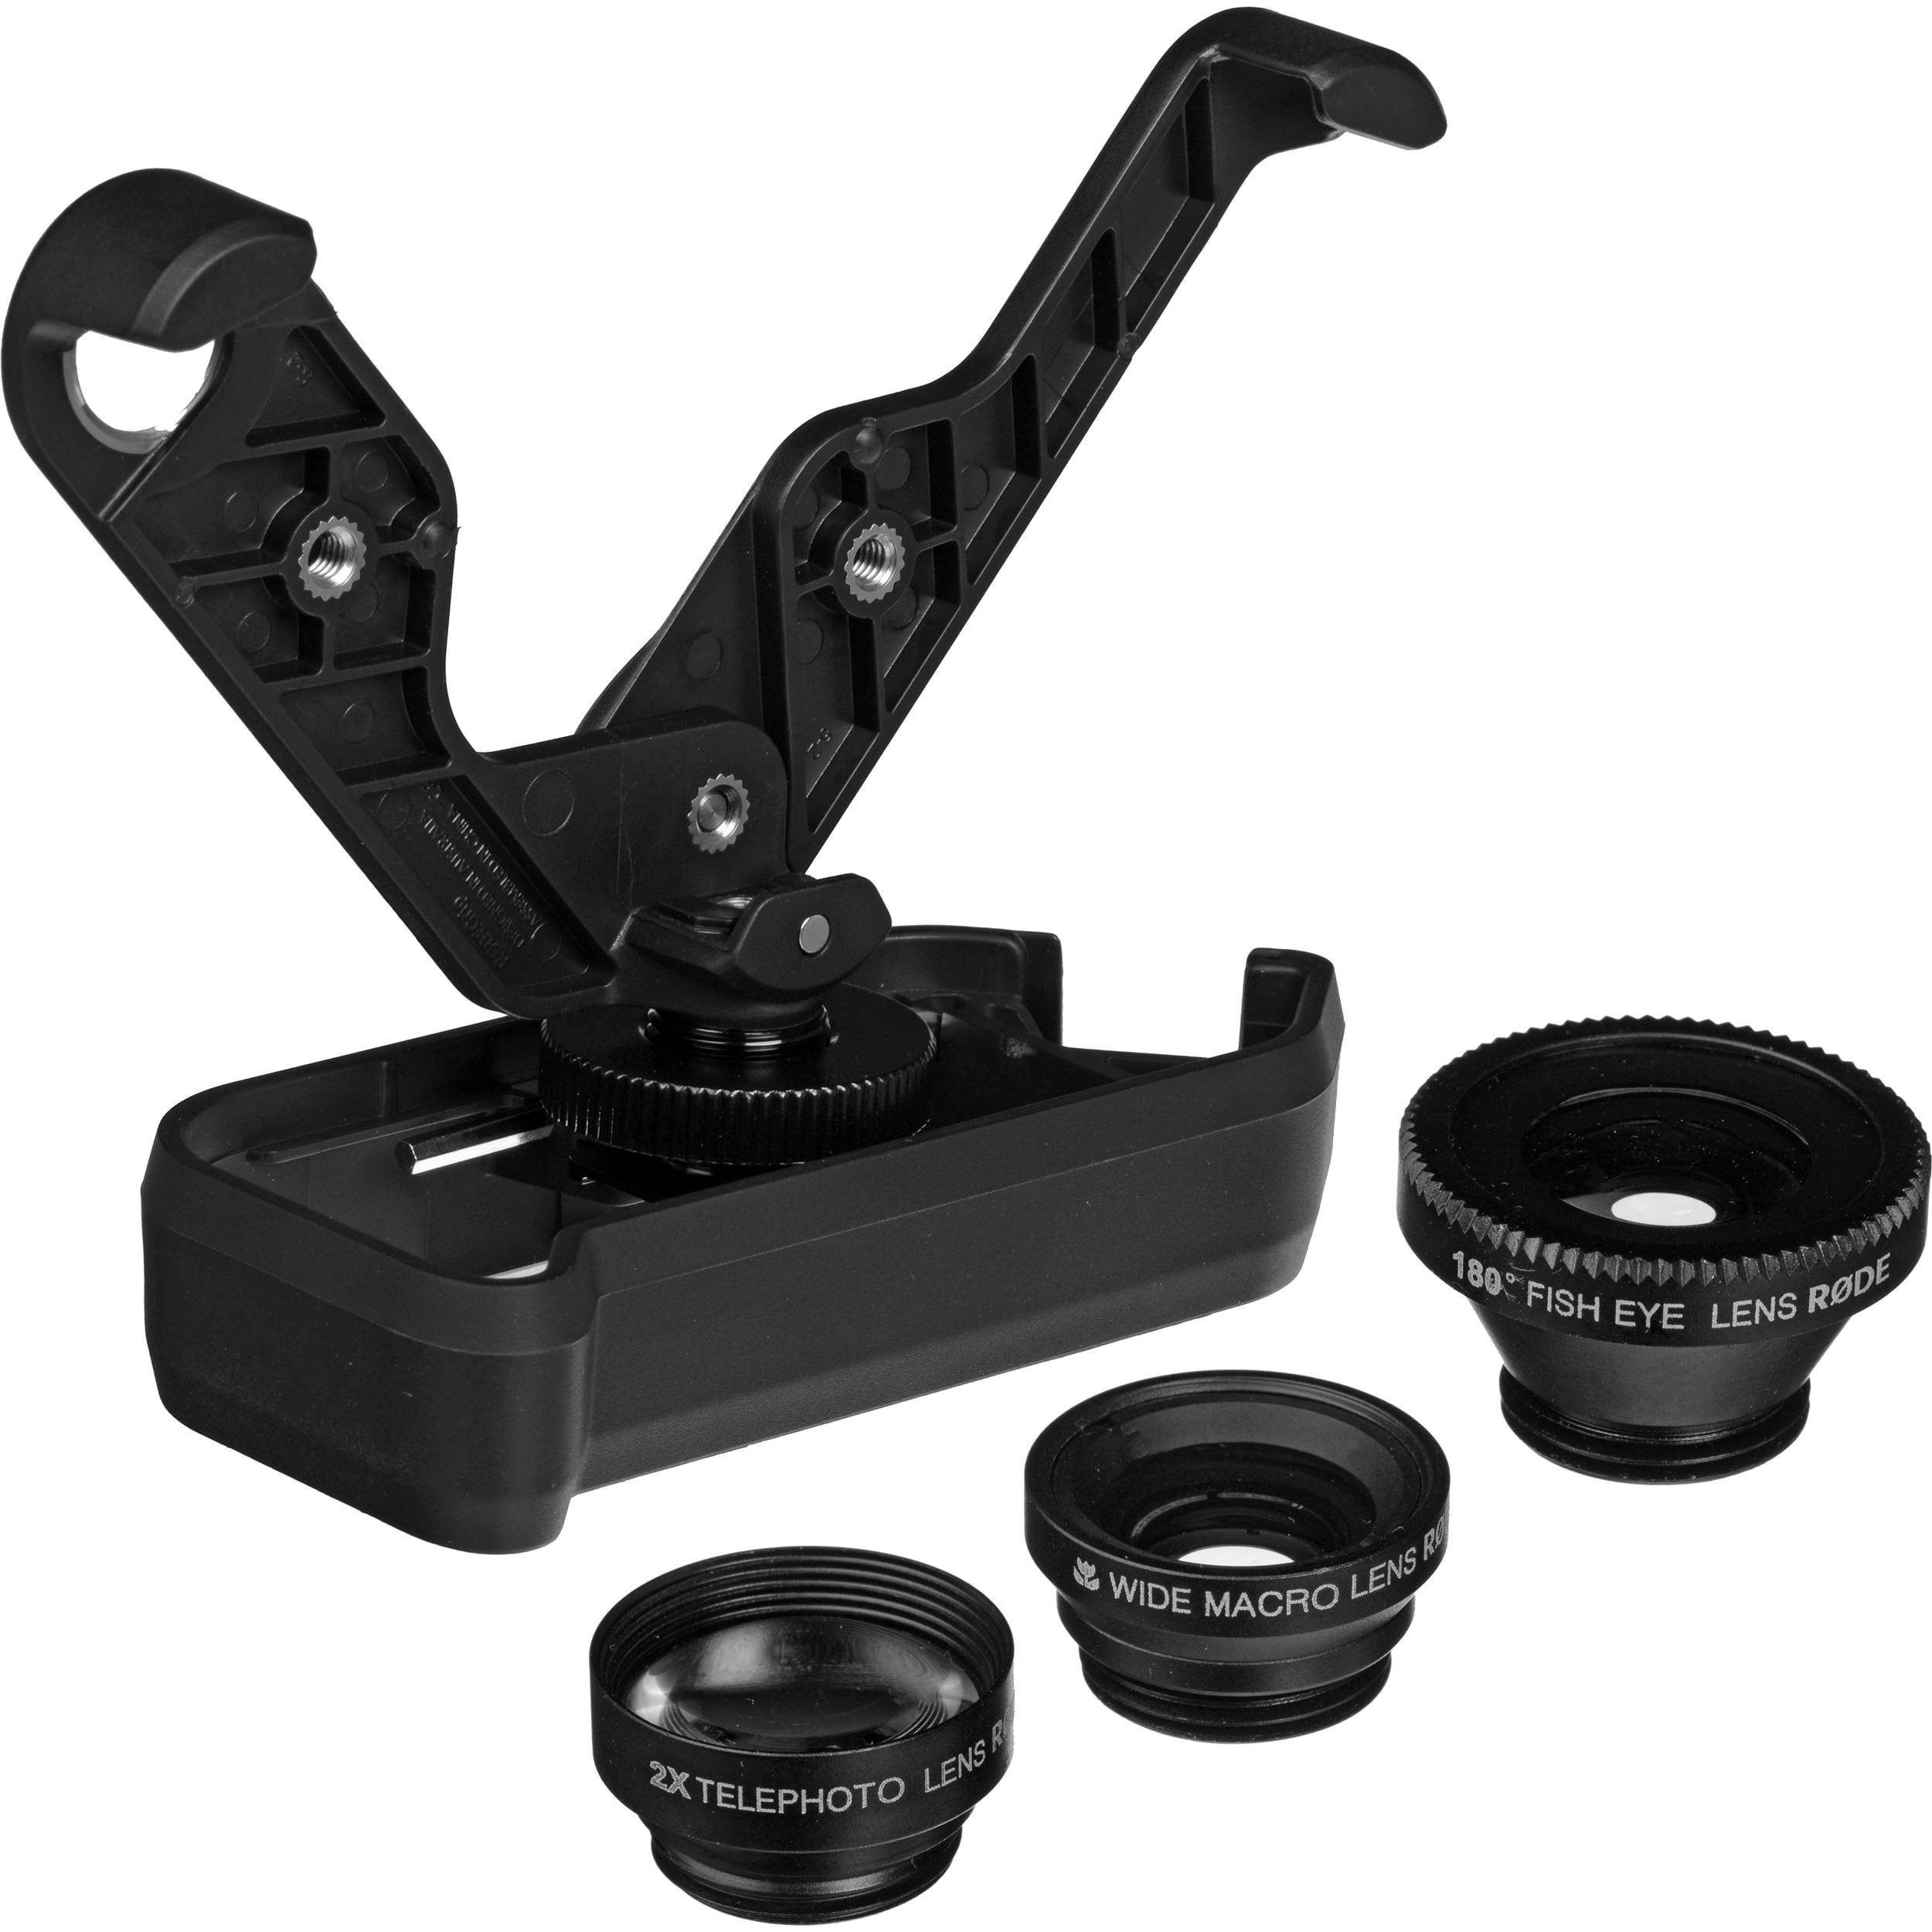 RodeGrip+ Multipurpose Mount and Lens Kit for the iPhone 5c